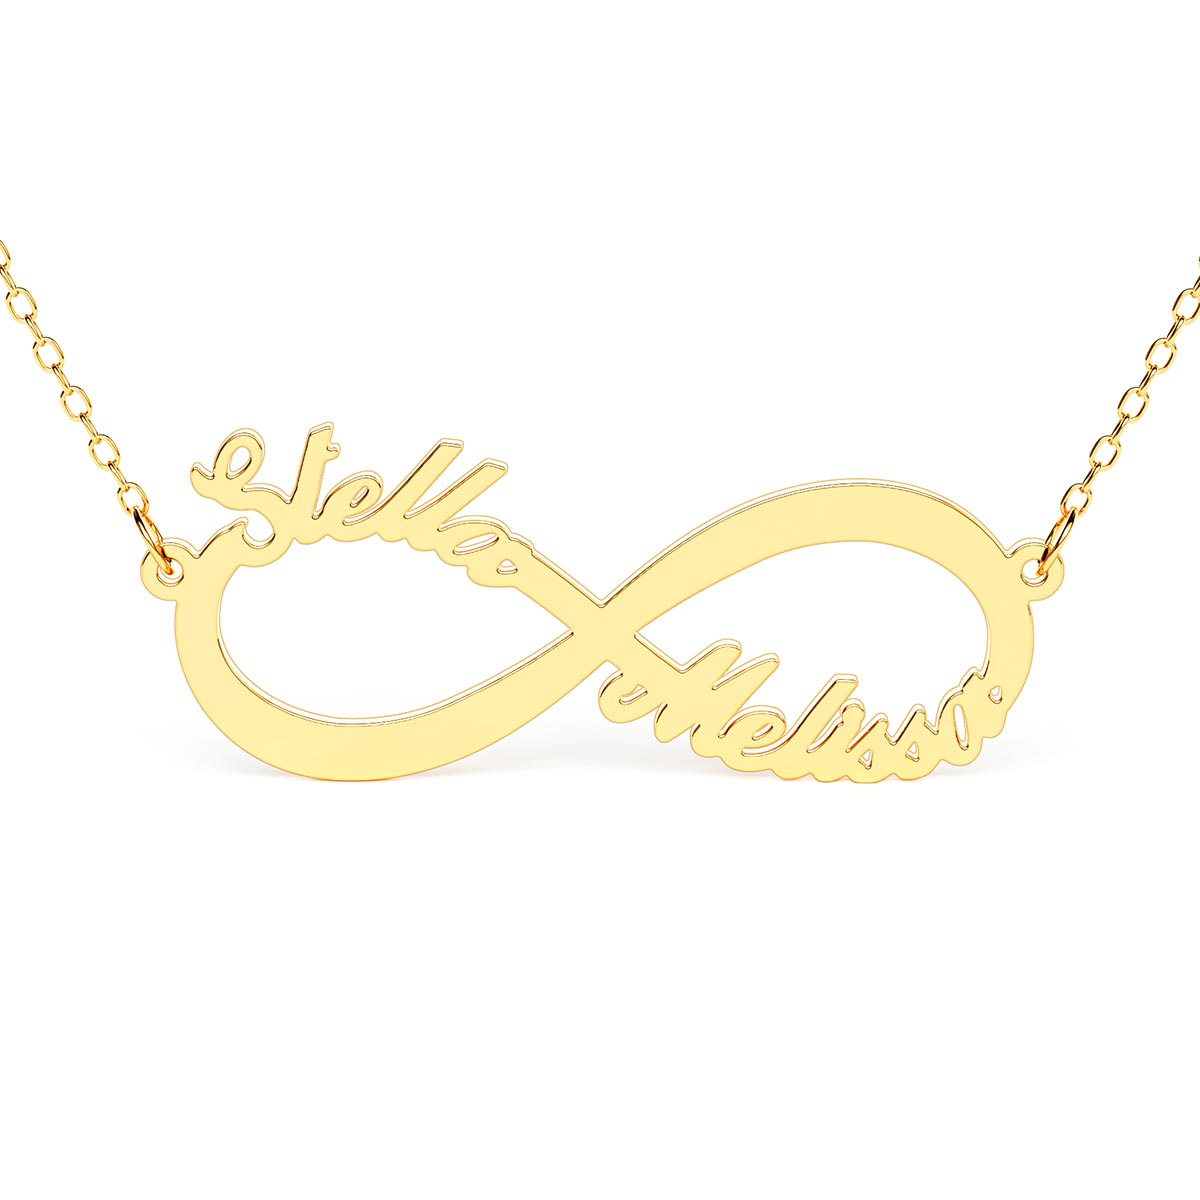 2 Name Infinity Necklace